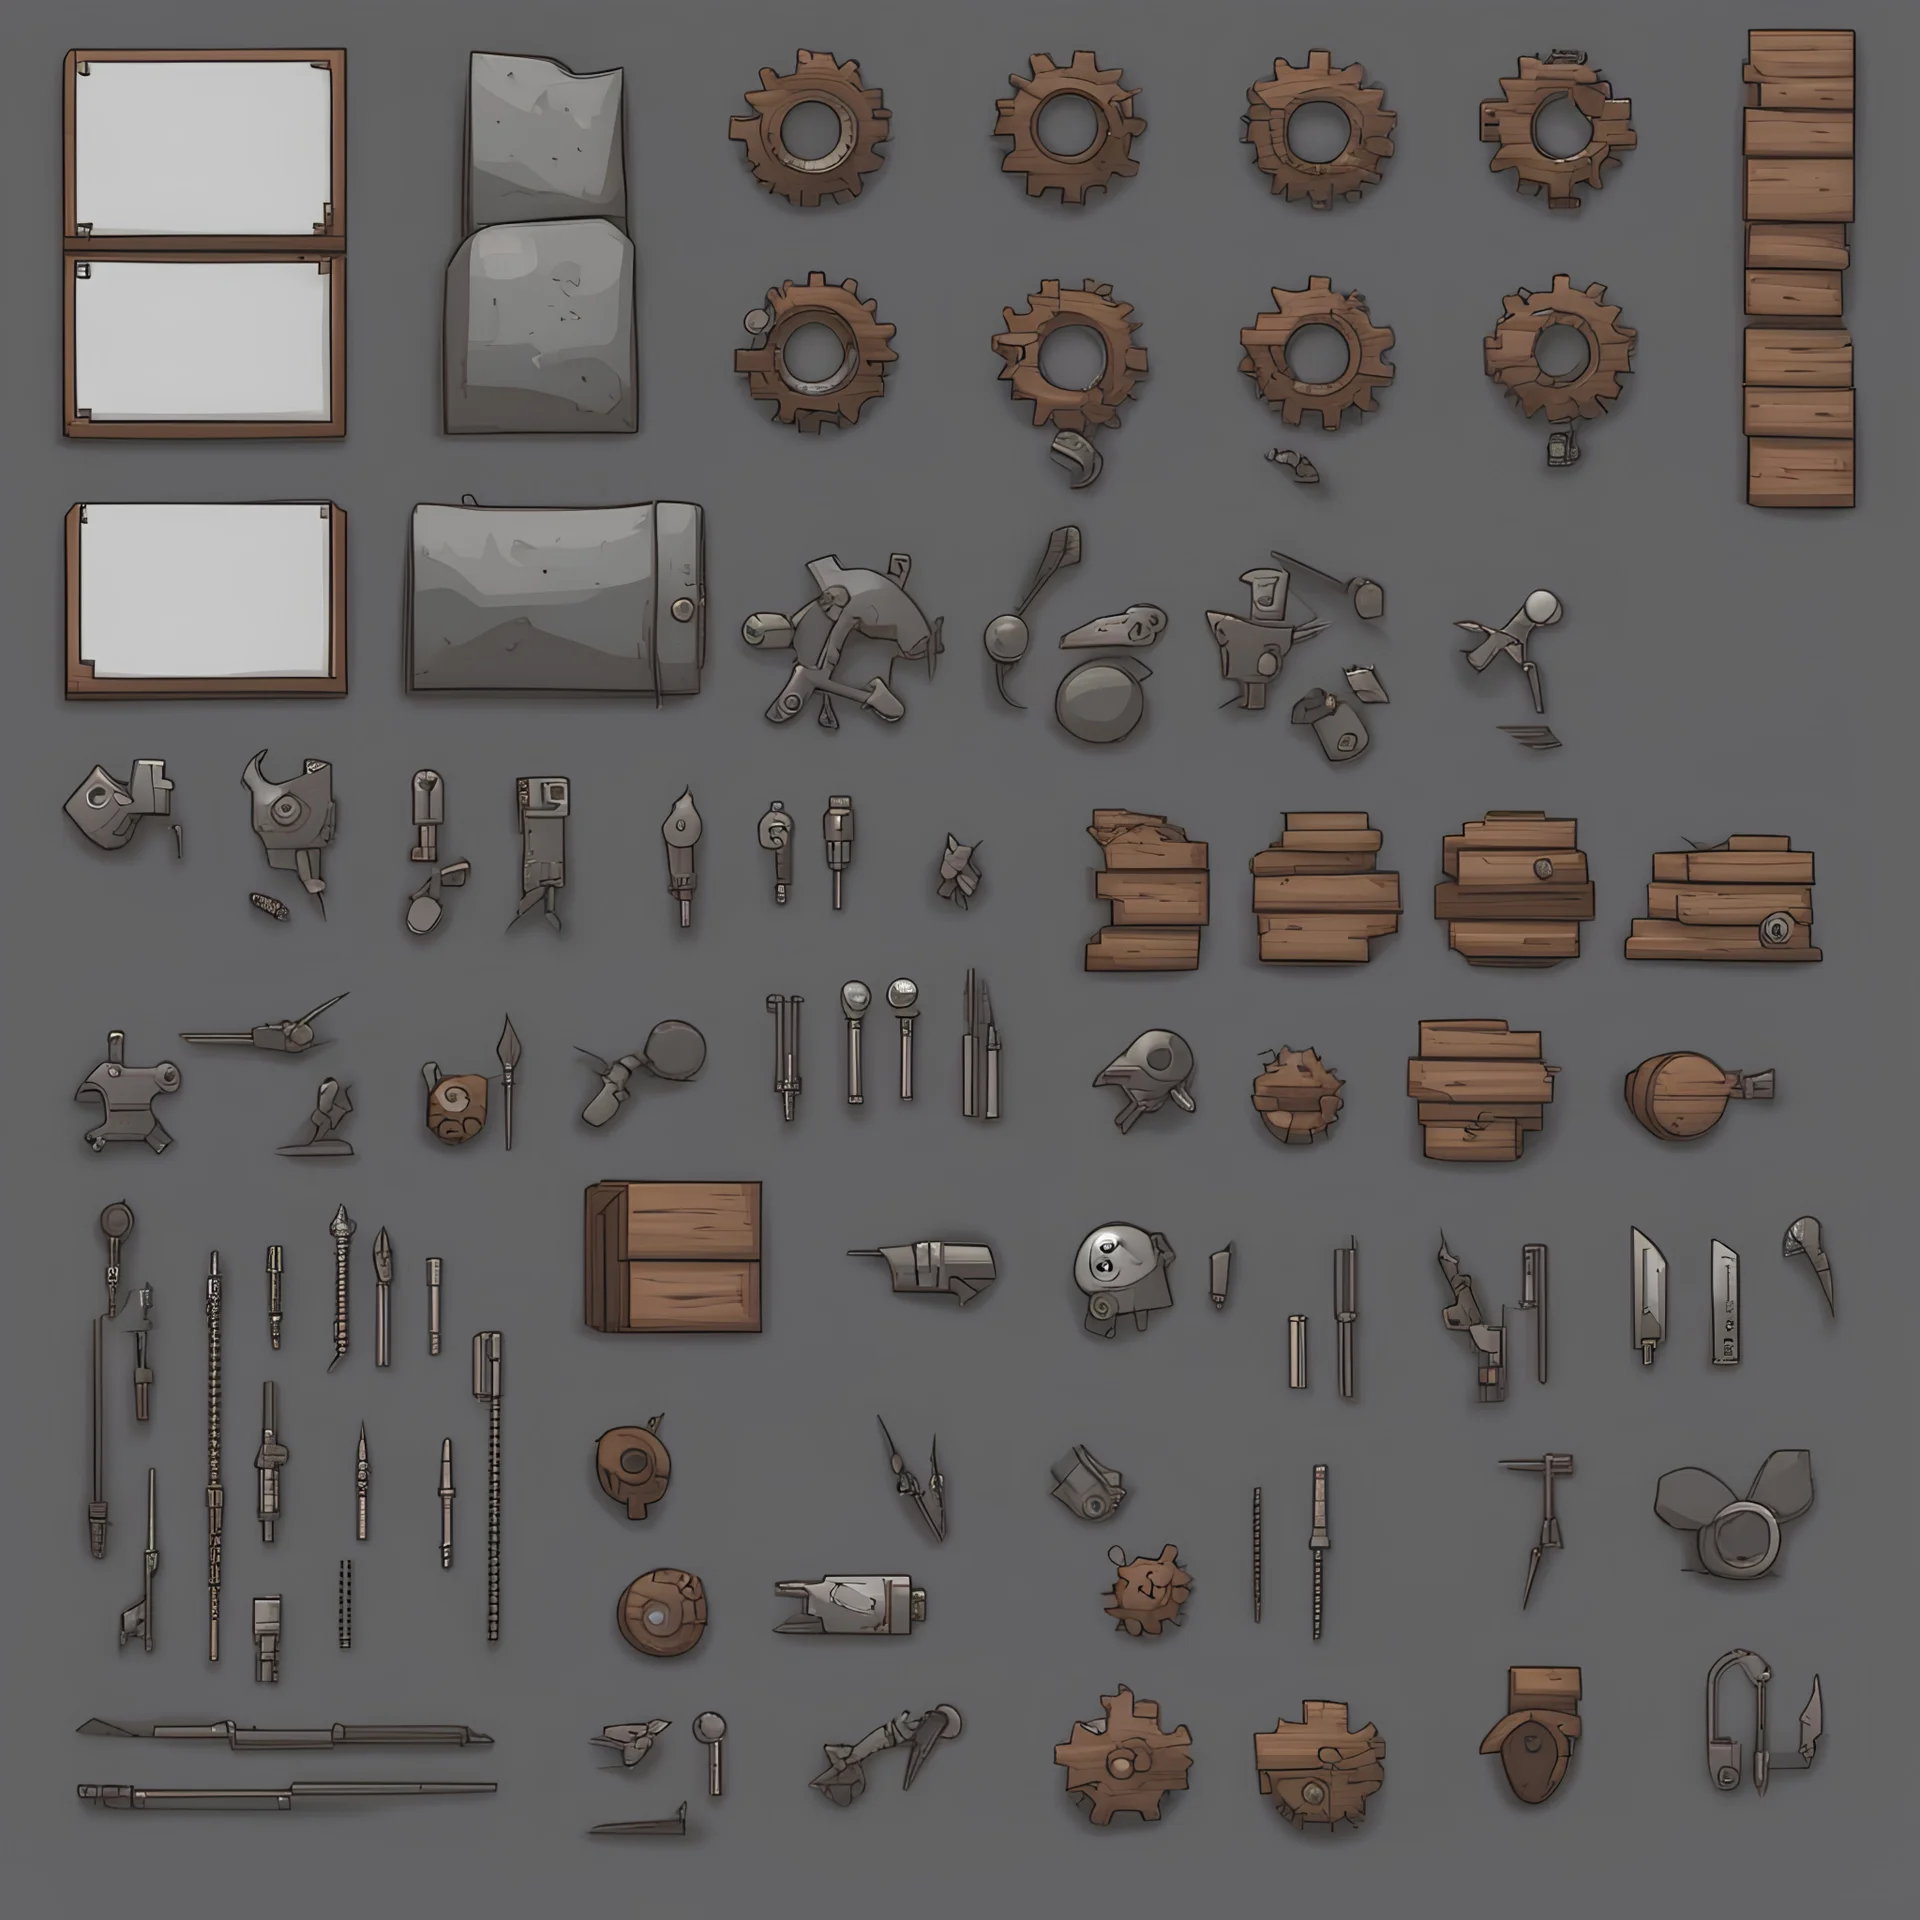 Sprite sheet, Wood, Nails, Metal scrap, cloth, electronics, gears, icons, survival game, gray background, comic book,